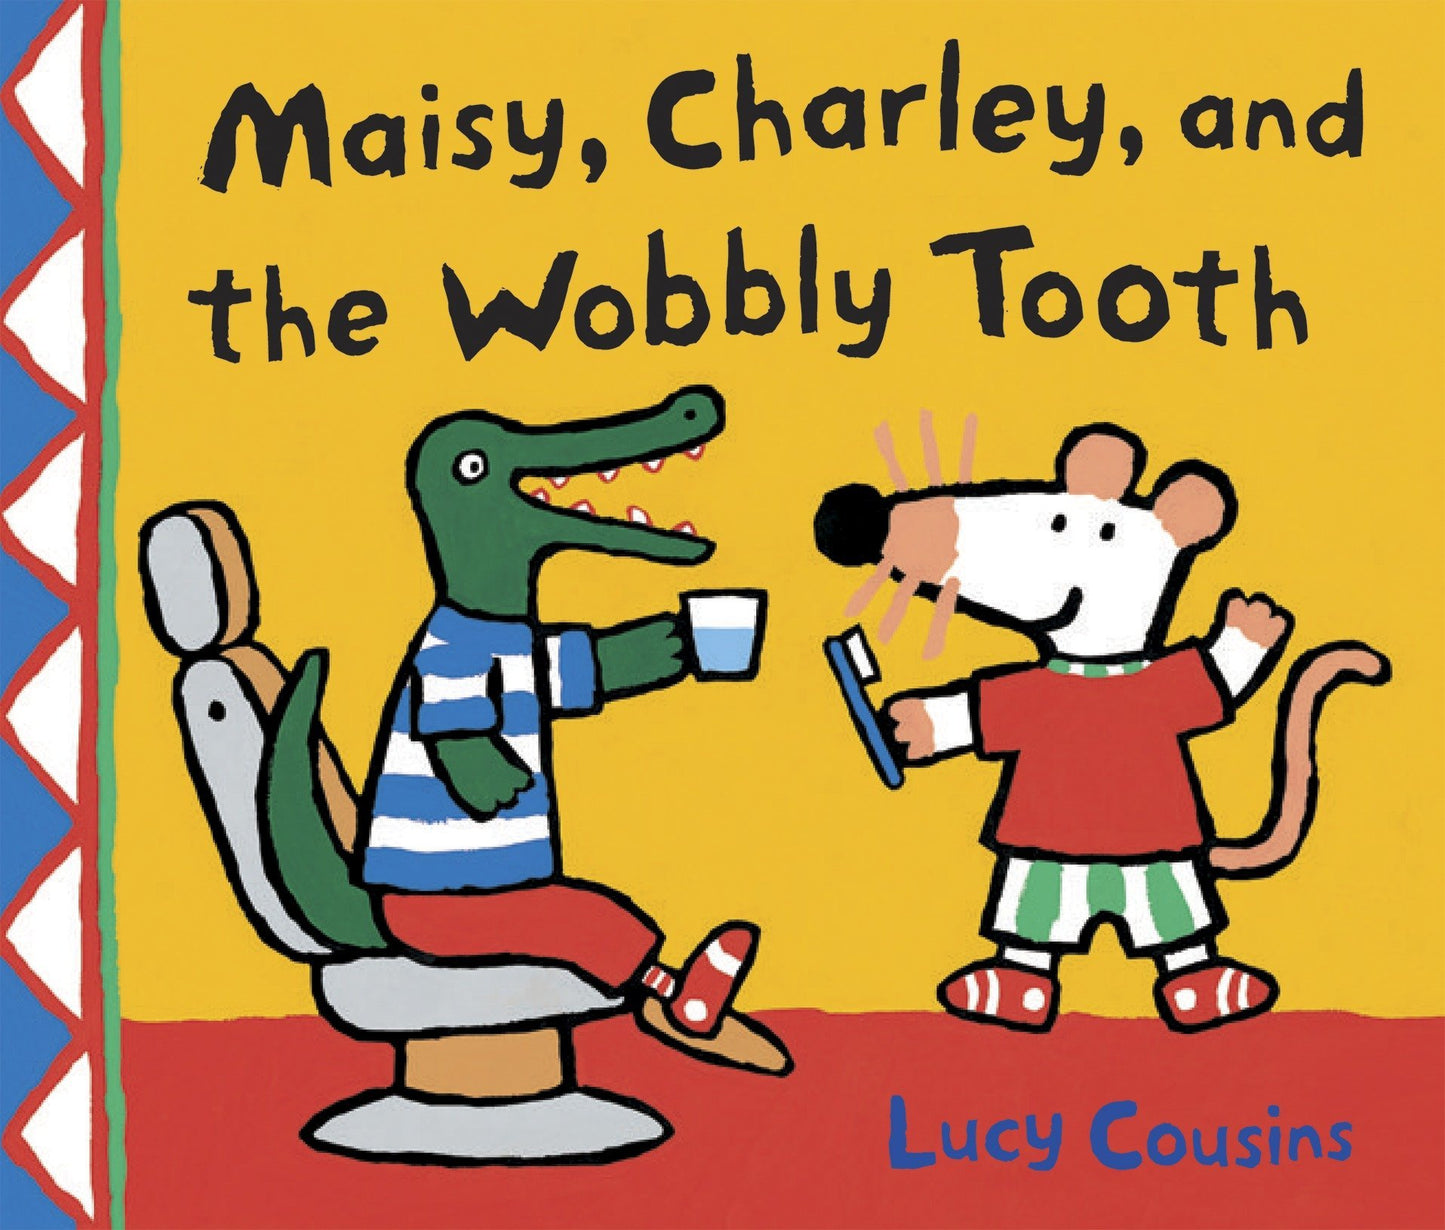 Maisy, Charley and the Wobbly Tooth - A Maisy First Experiences Book by Lucy Cousins